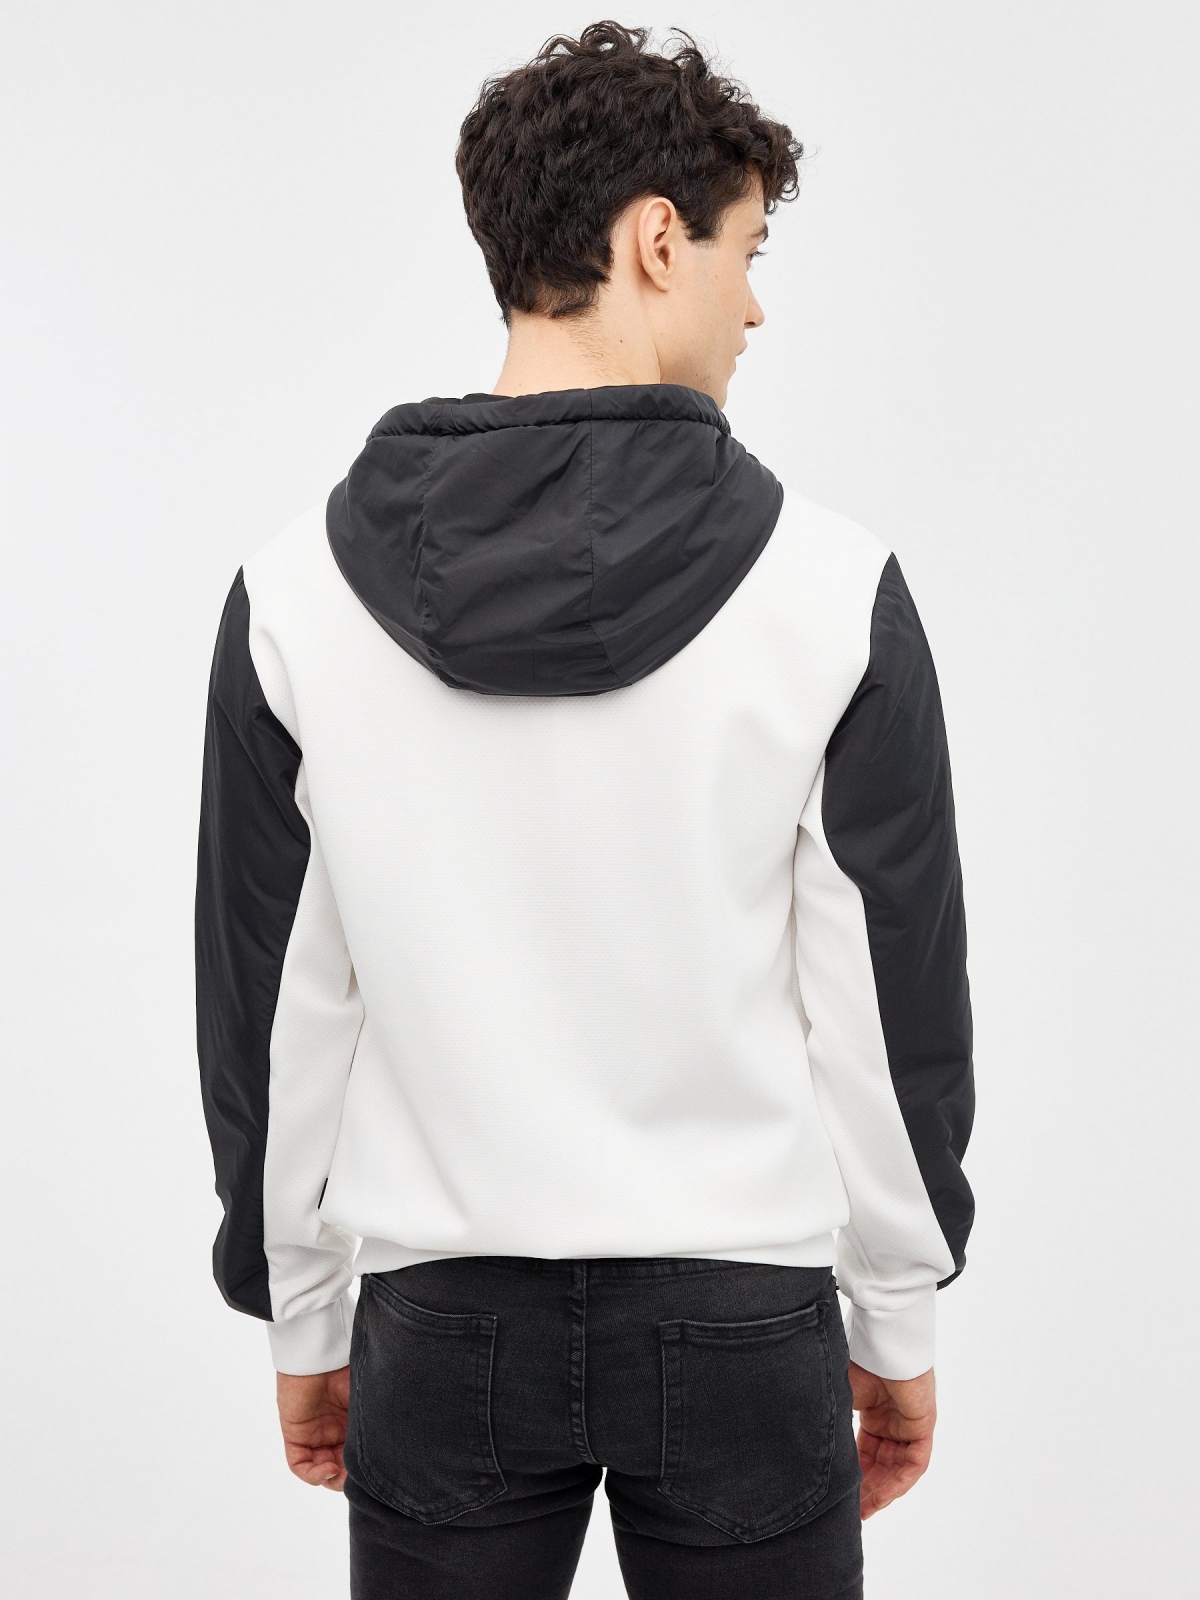 Sweatshirt with zippered pockets white middle back view